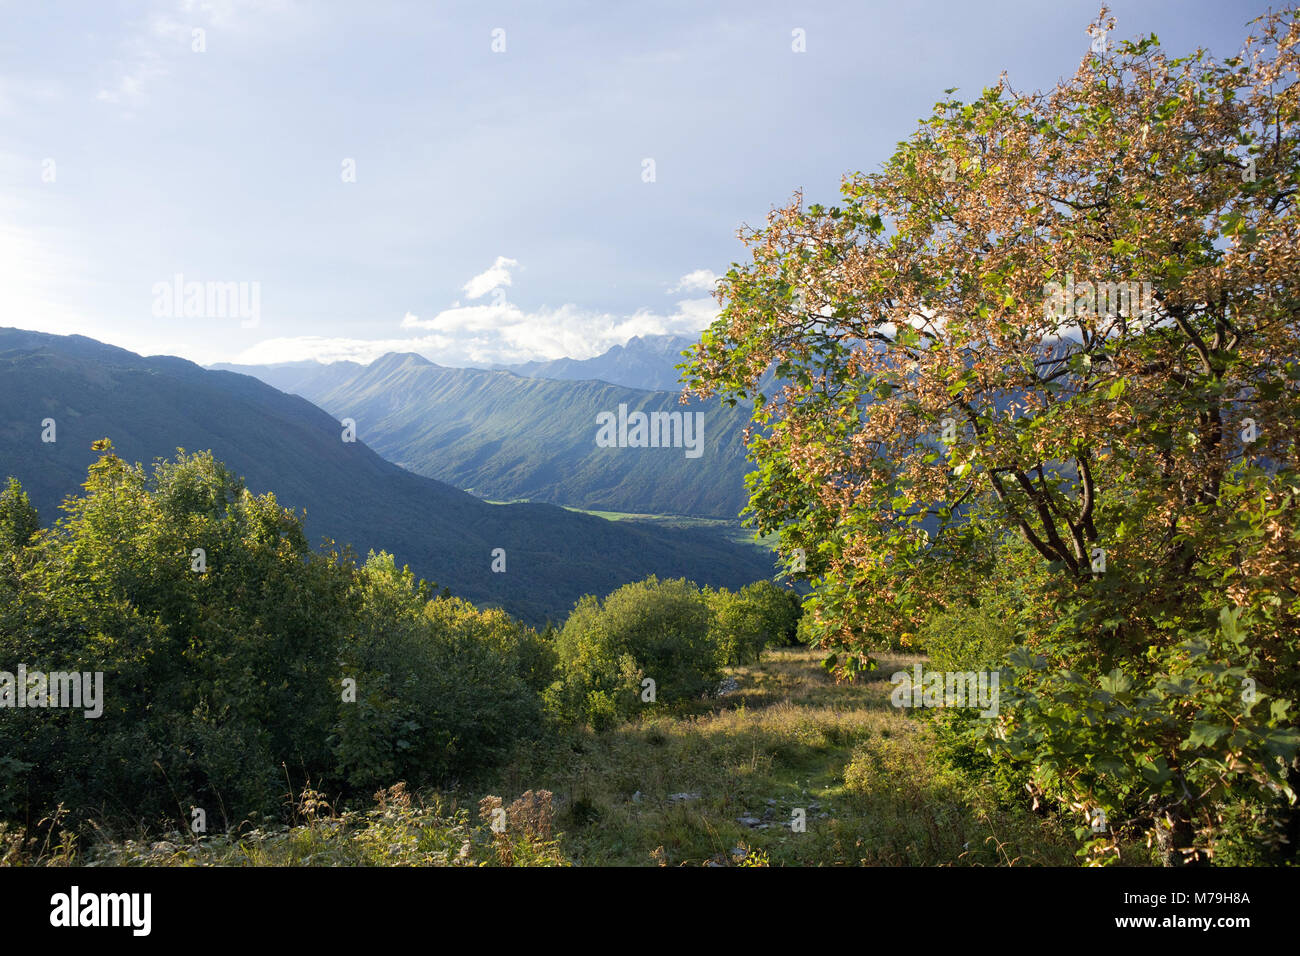 Evening mood, view from the Kuk, in the background the ridge of the Kobariski Stol, Julian Alps, Slovenia, Stock Photo